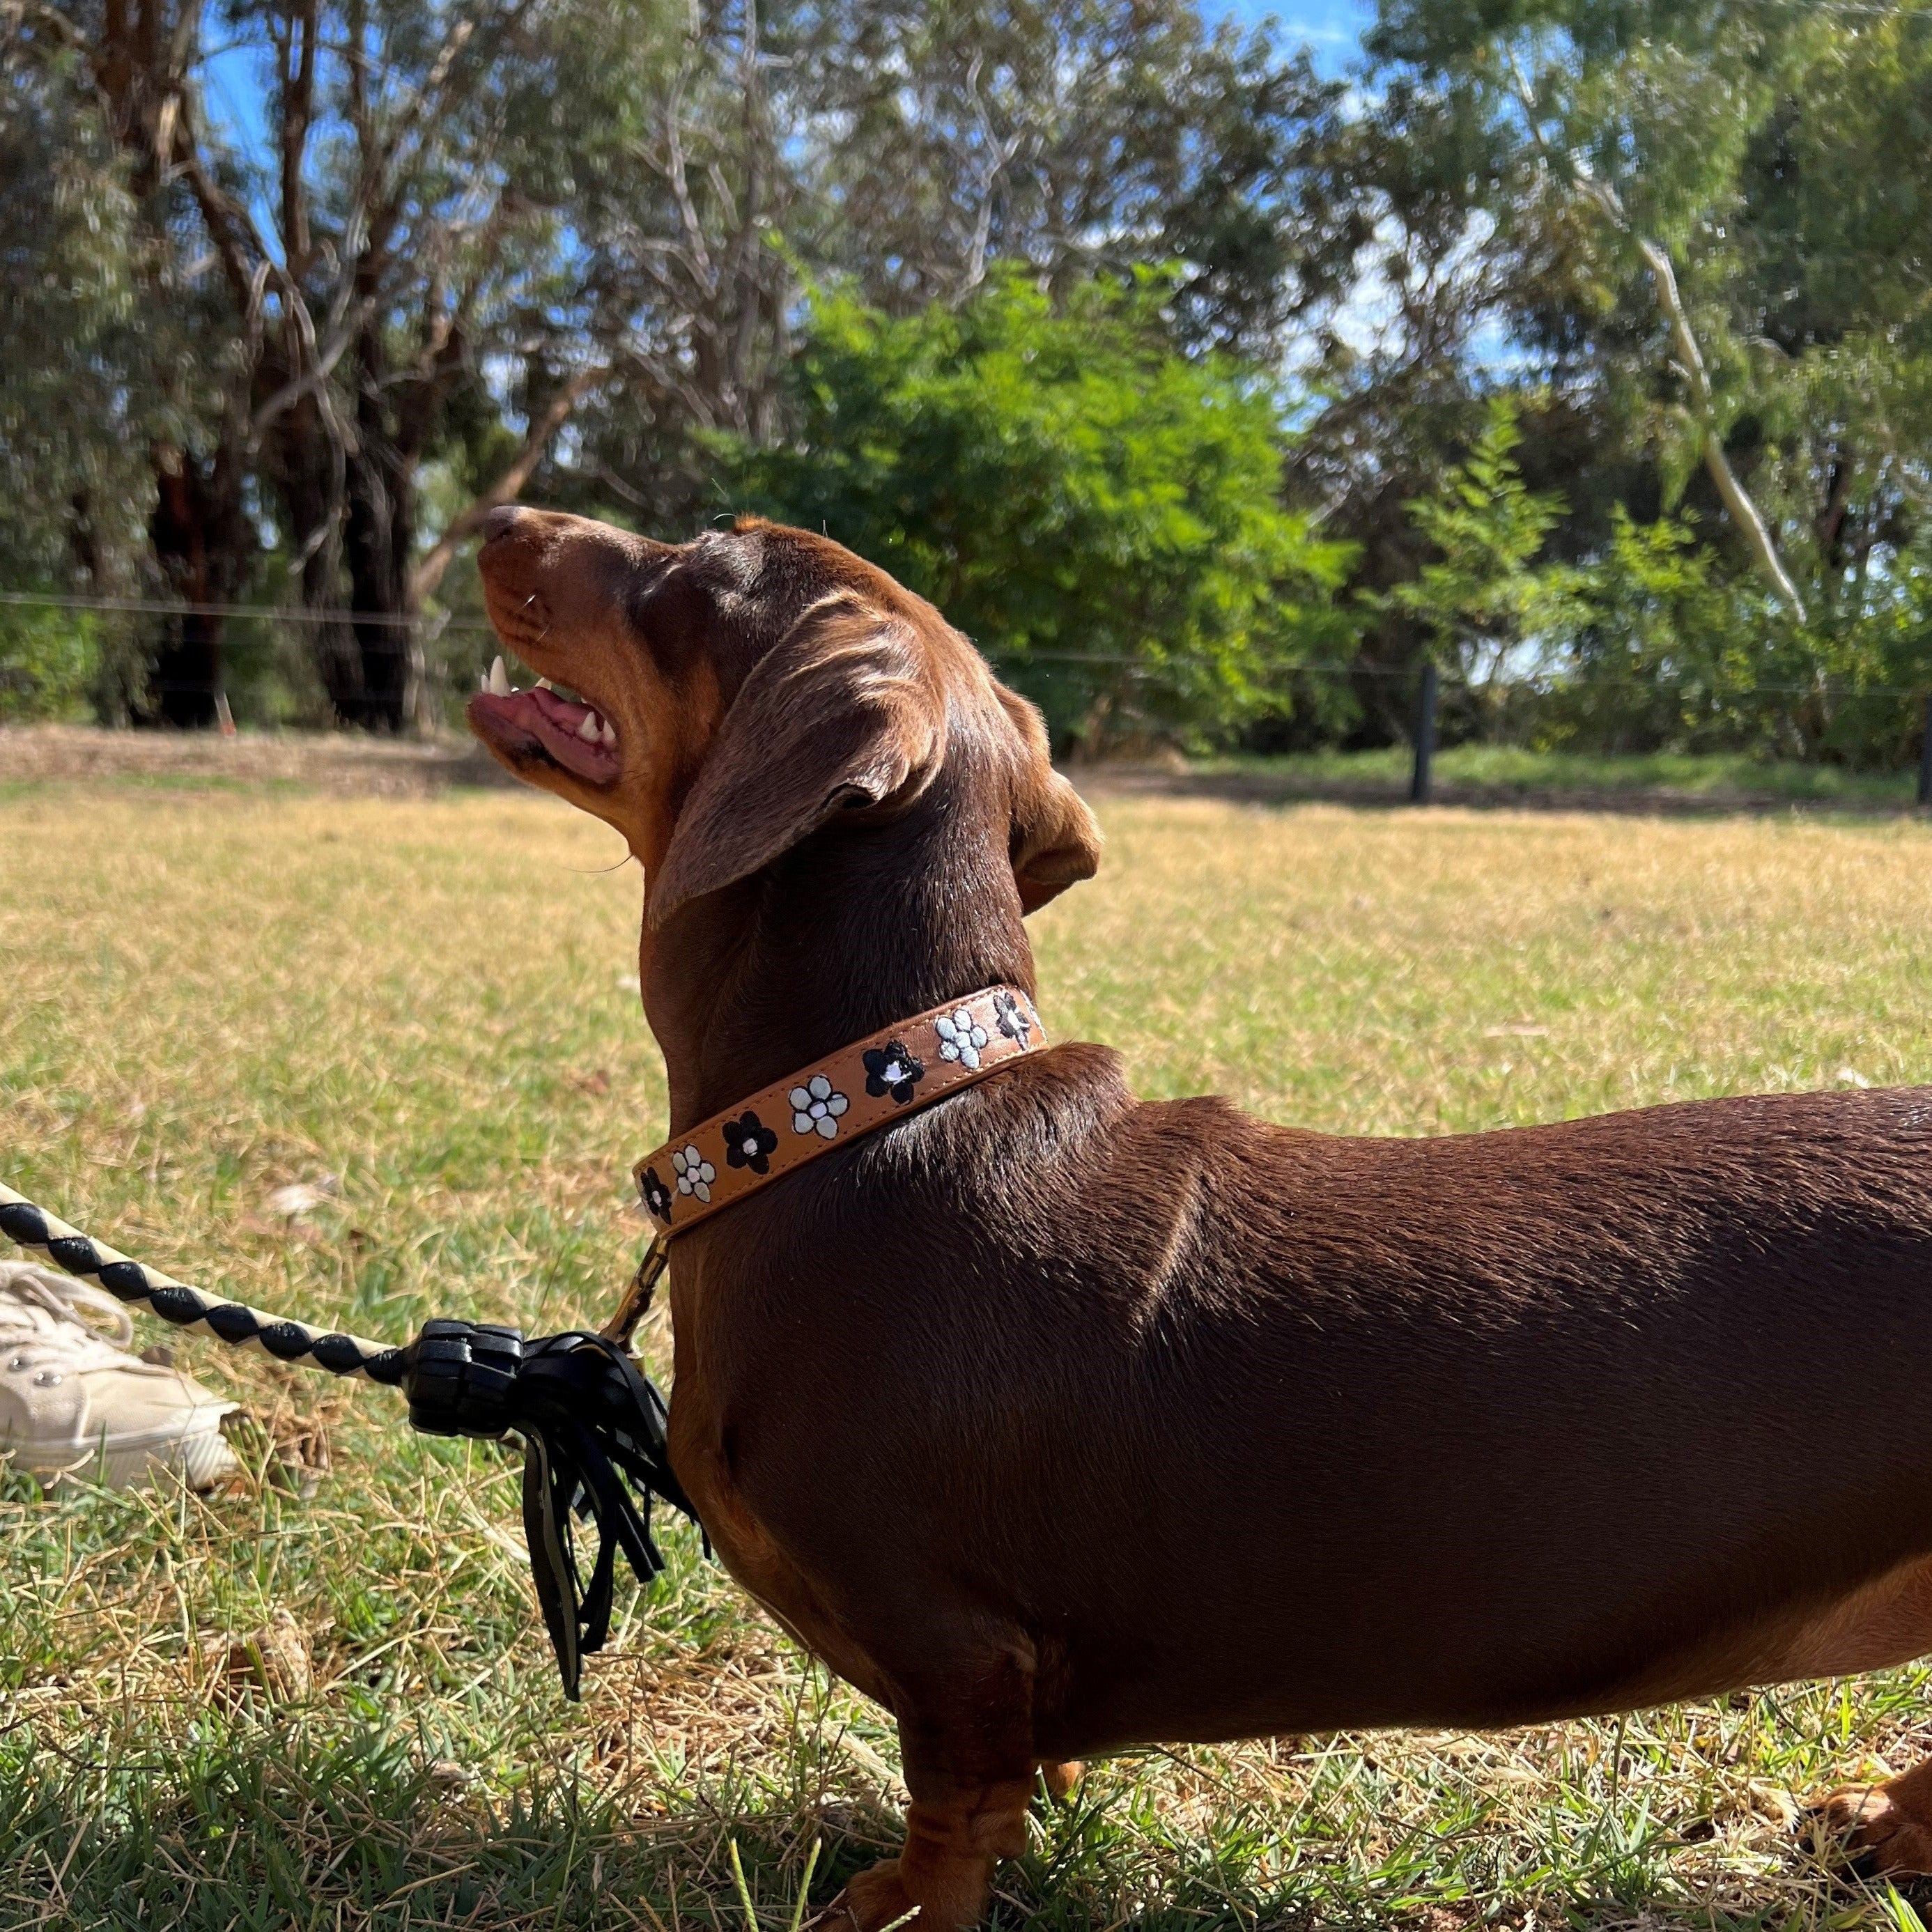 A dachshund on a leash, with a Georgie Paws butter-soft leather studded collar, stands alert on patchy grass, partially shaded by trees, as a person in casual footwear partially appears in